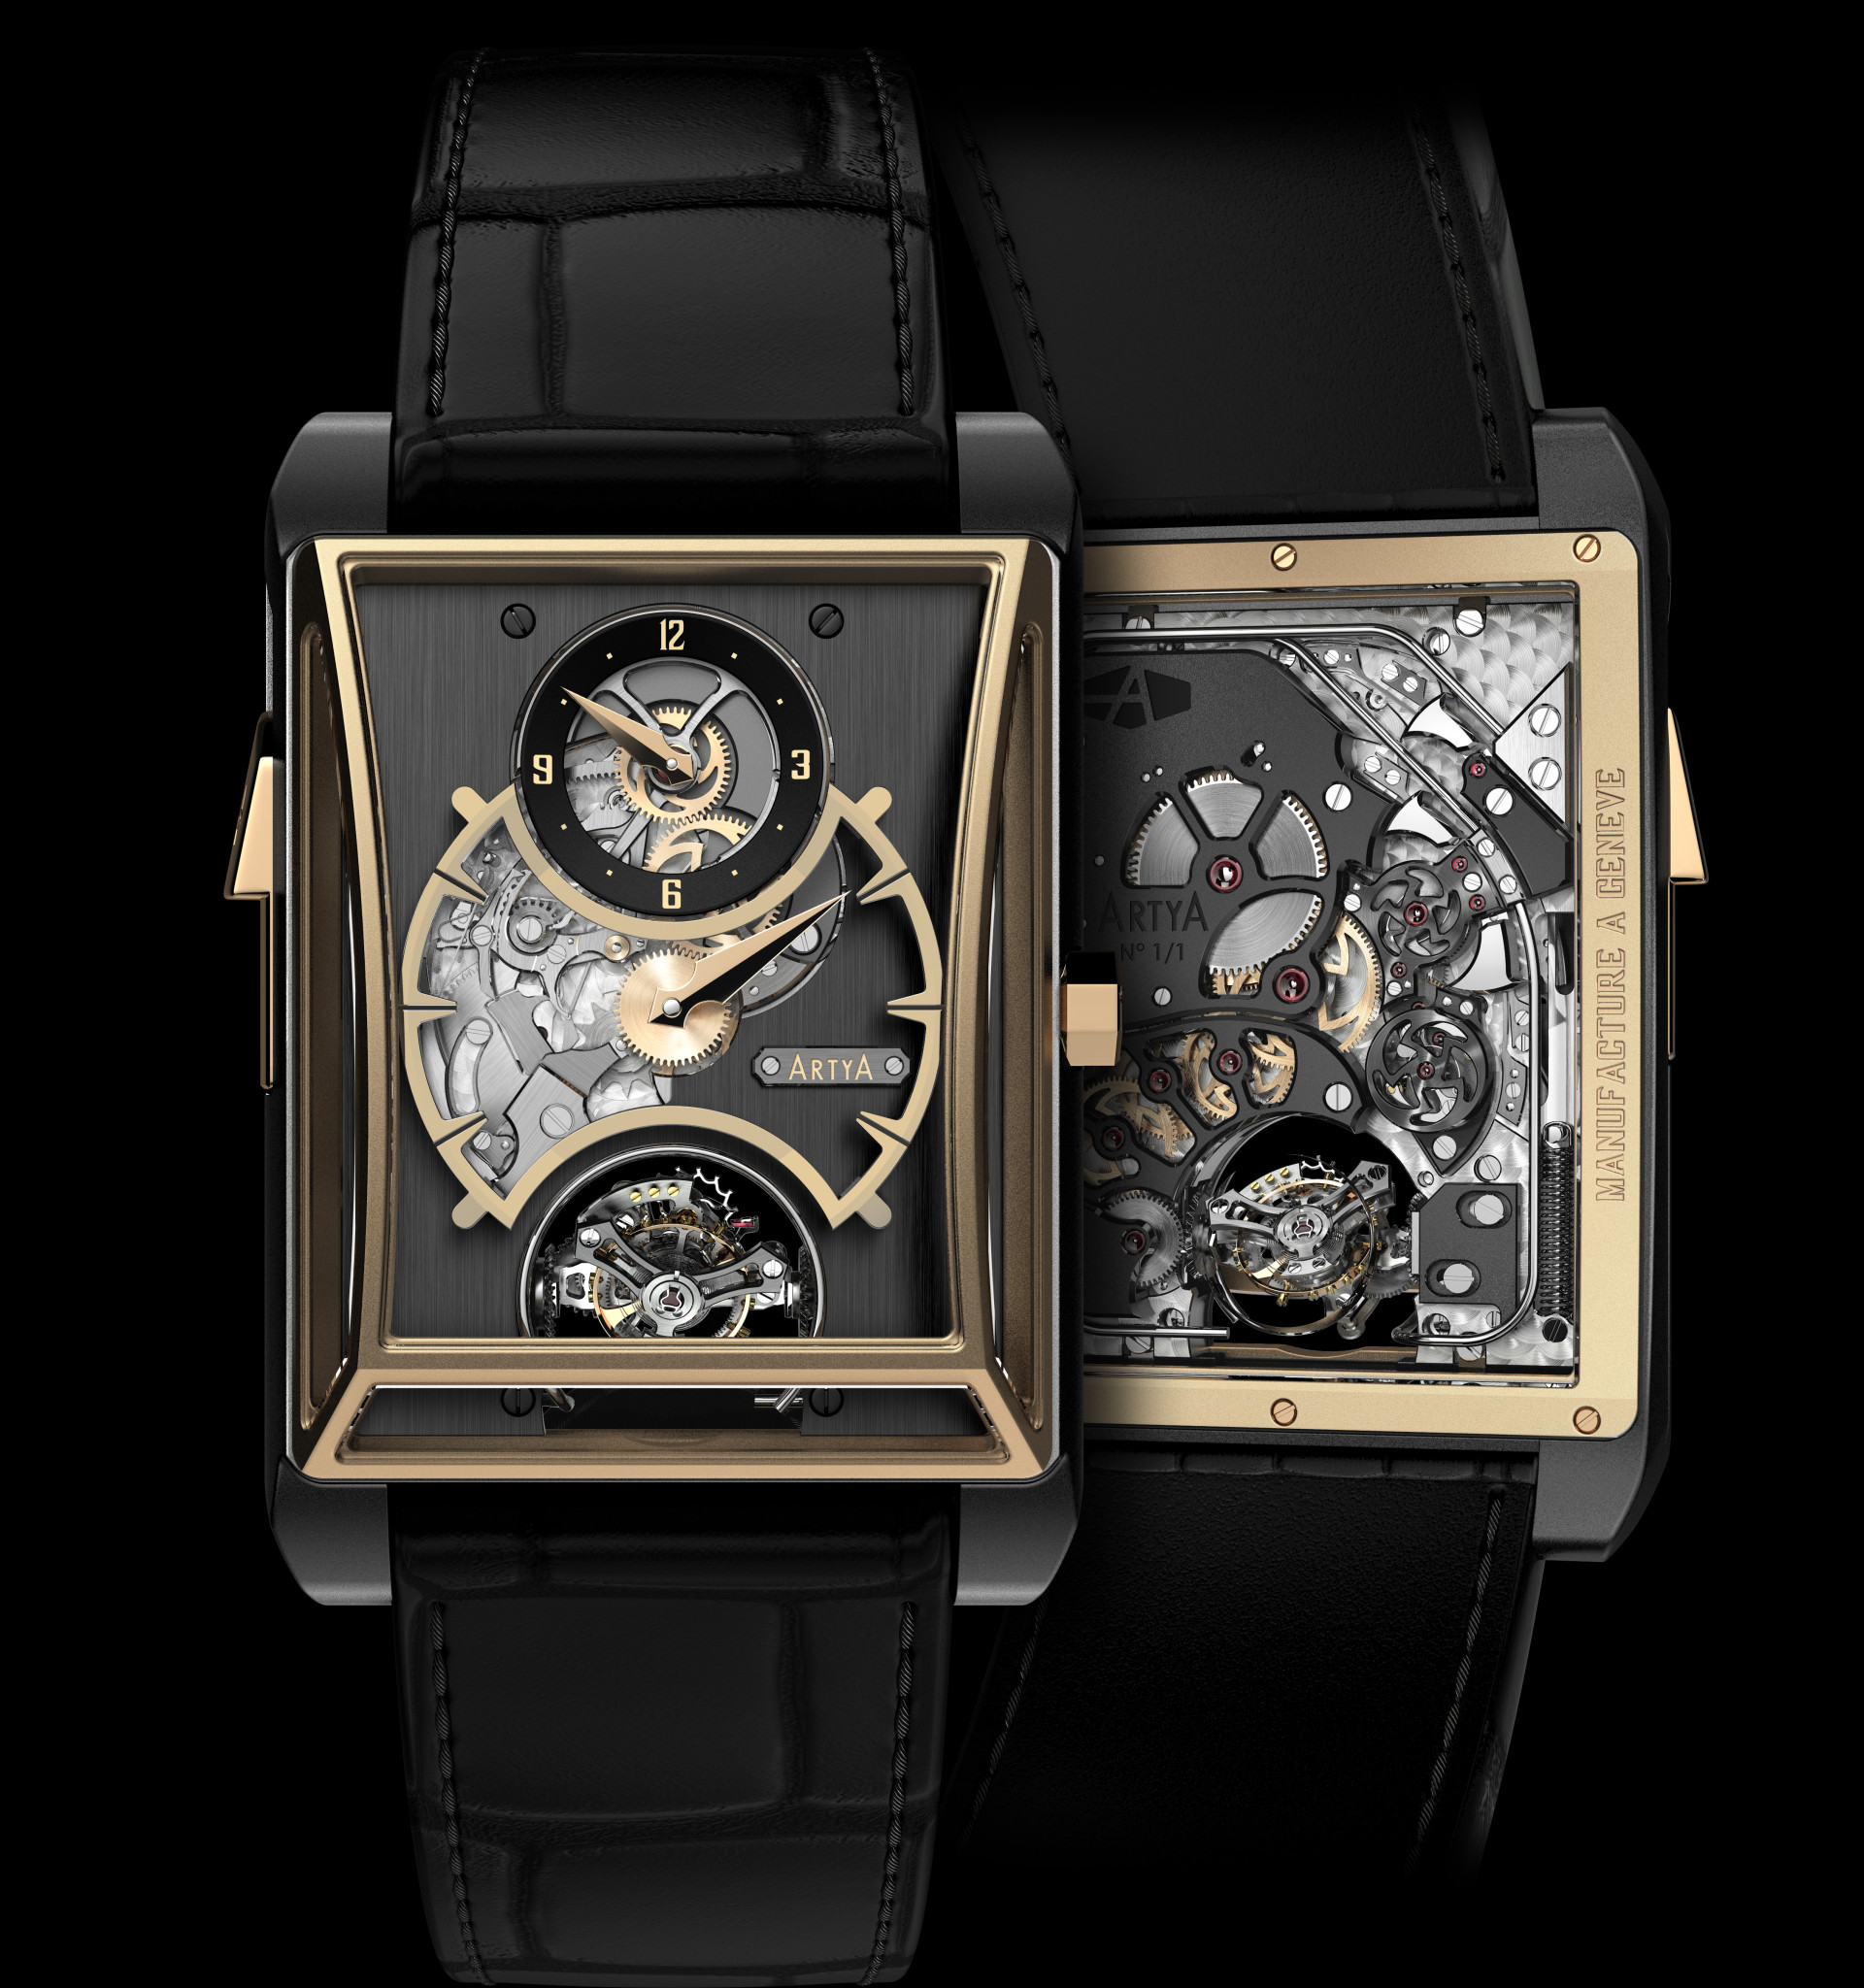 Artya 3 gongs minute repeater regulator and double axis tourbillon